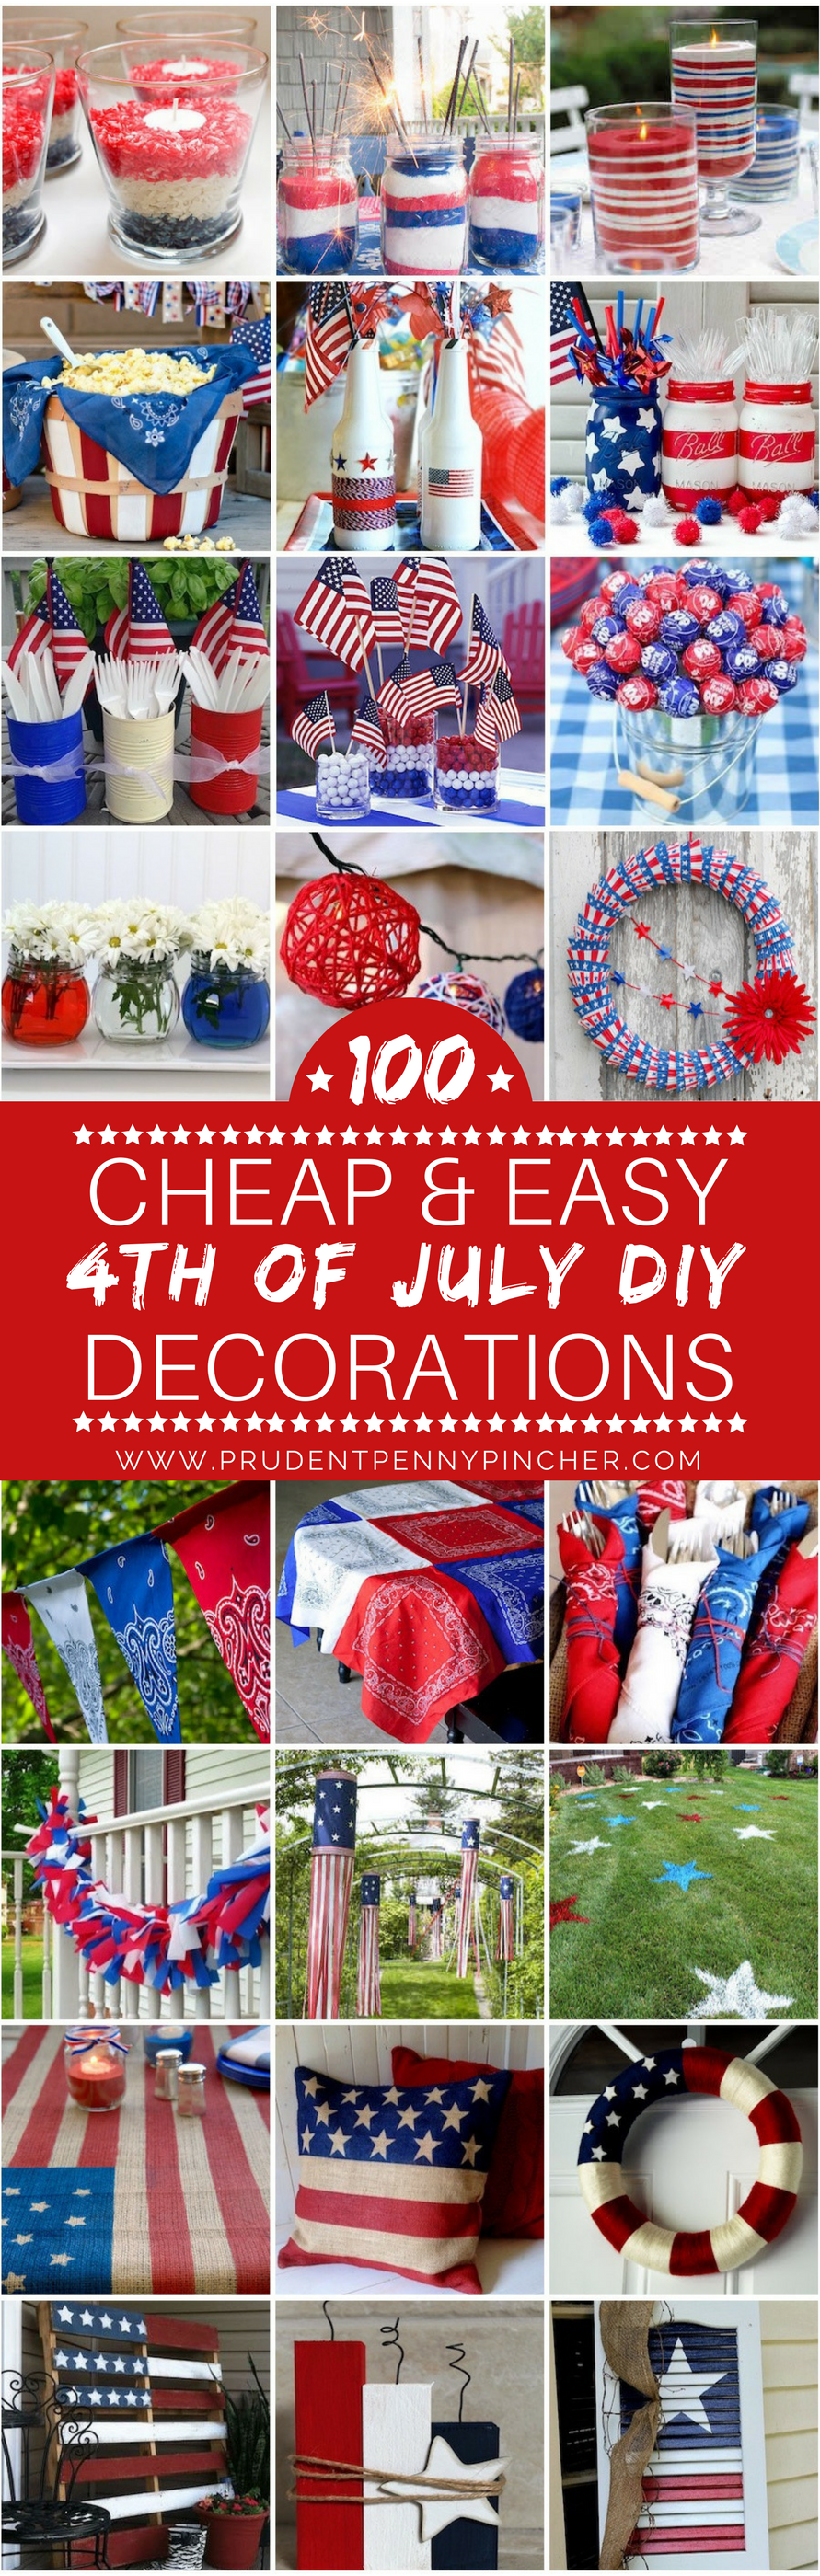 Shares Check out these creative 4th of July decoration ideas that are easy to make and easy on the wallet. These patriotic DIY